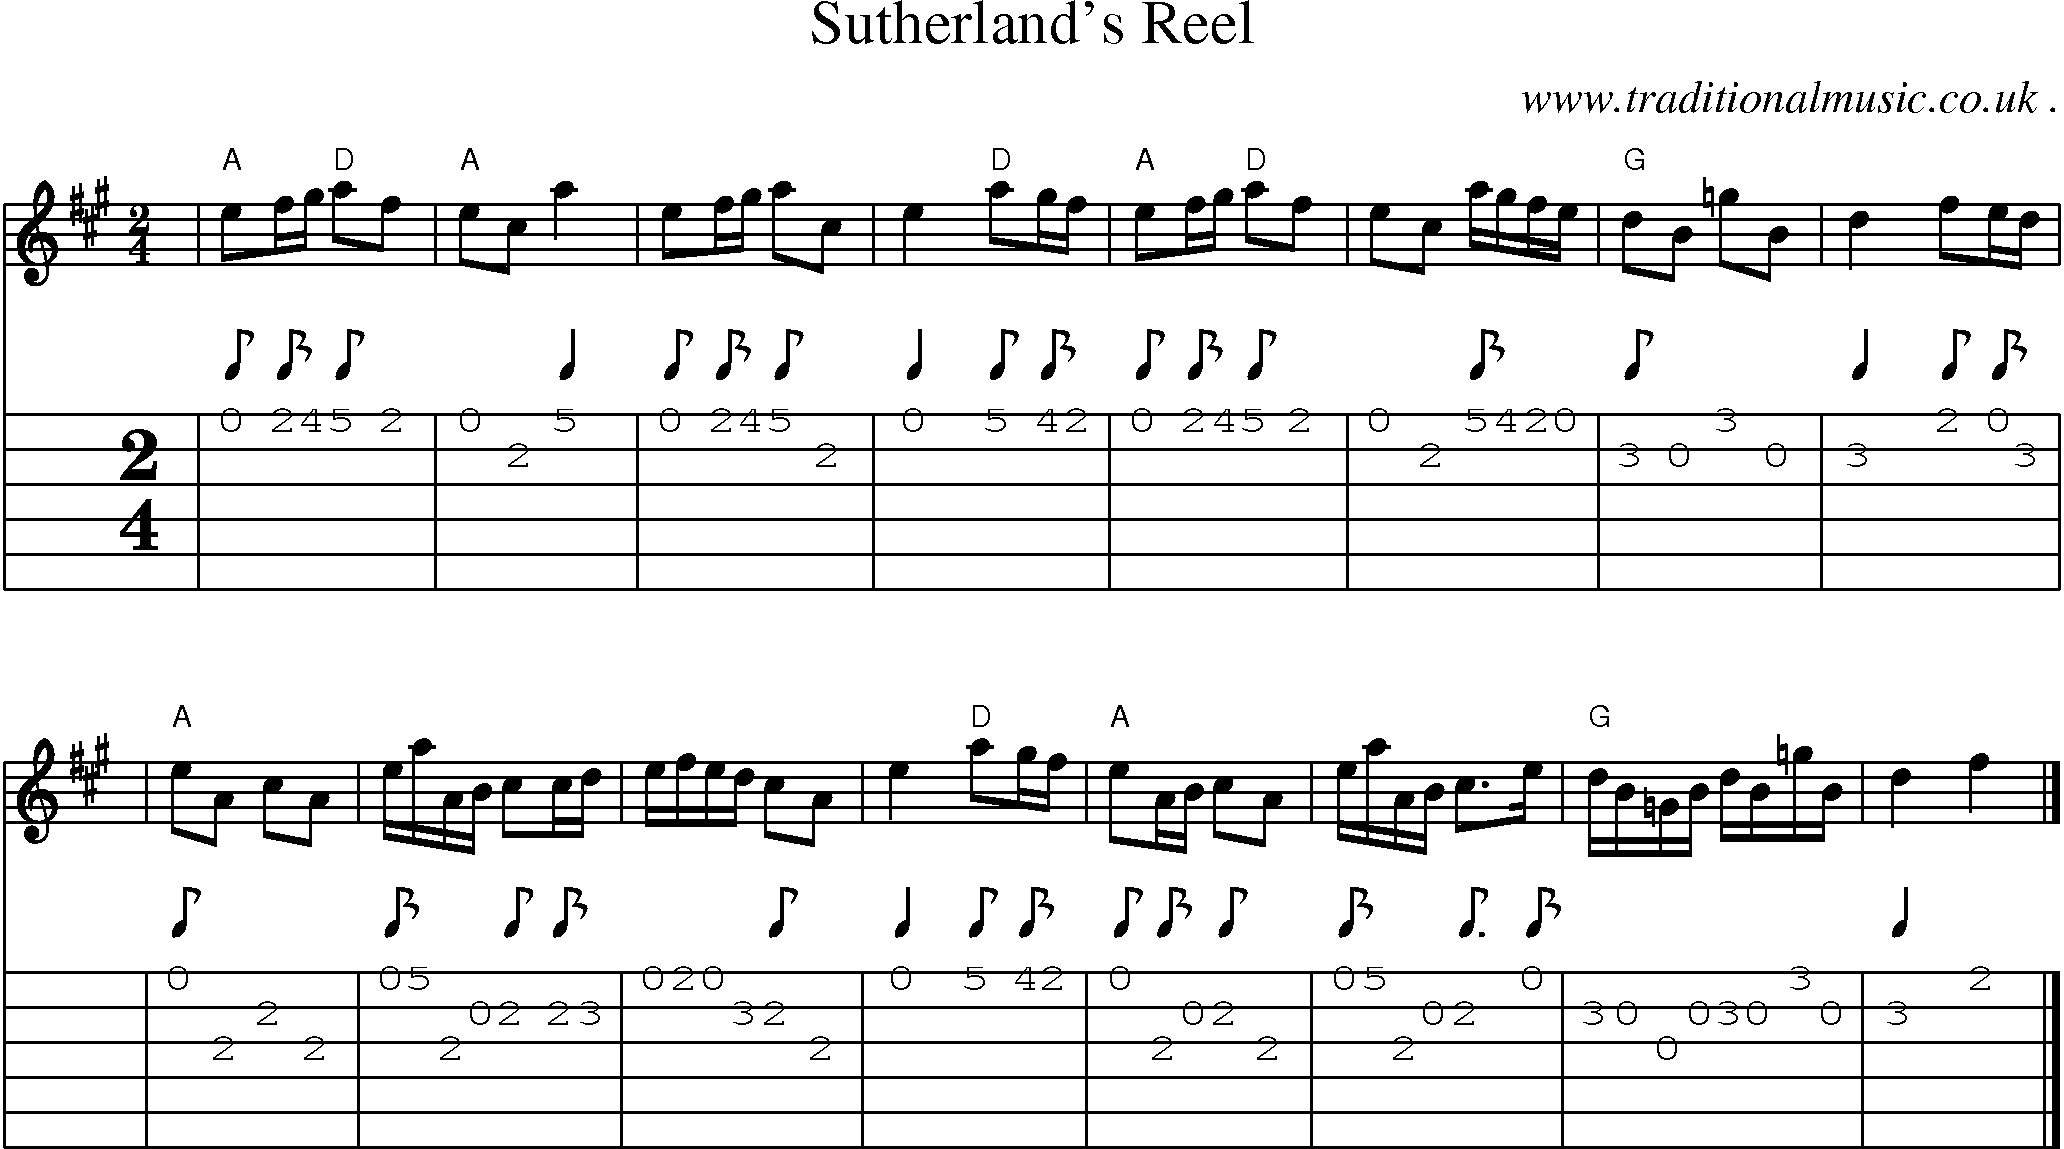 Sheet-music  score, Chords and Guitar Tabs for Sutherlands Reel